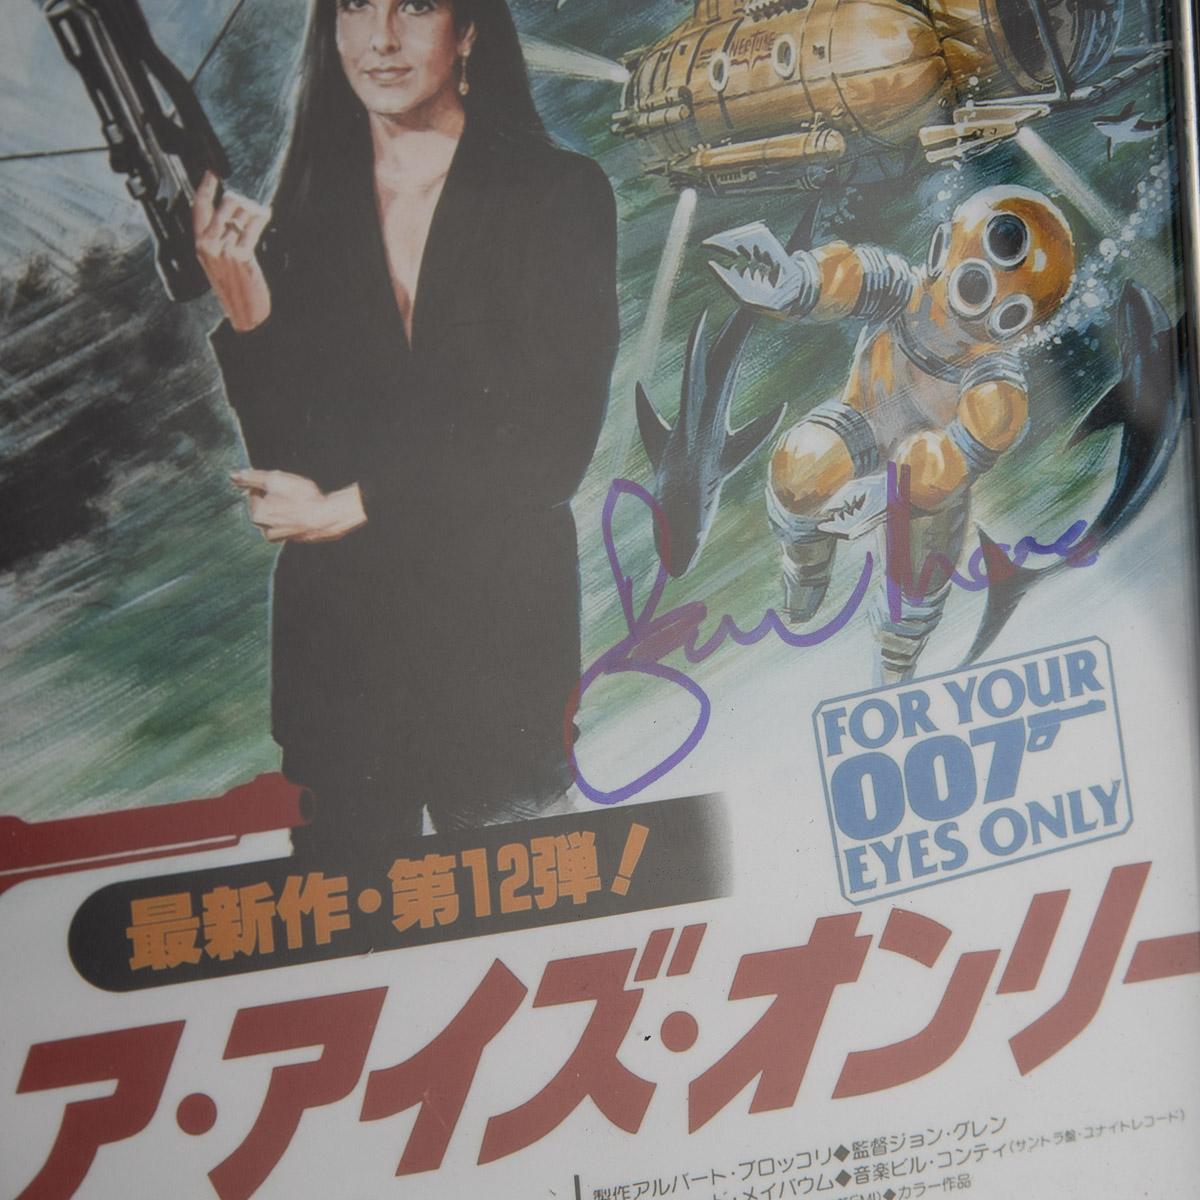 Original Japanese Signed By Roger Moore 'For Your Eyes Only' Mini Poster For Sale 3